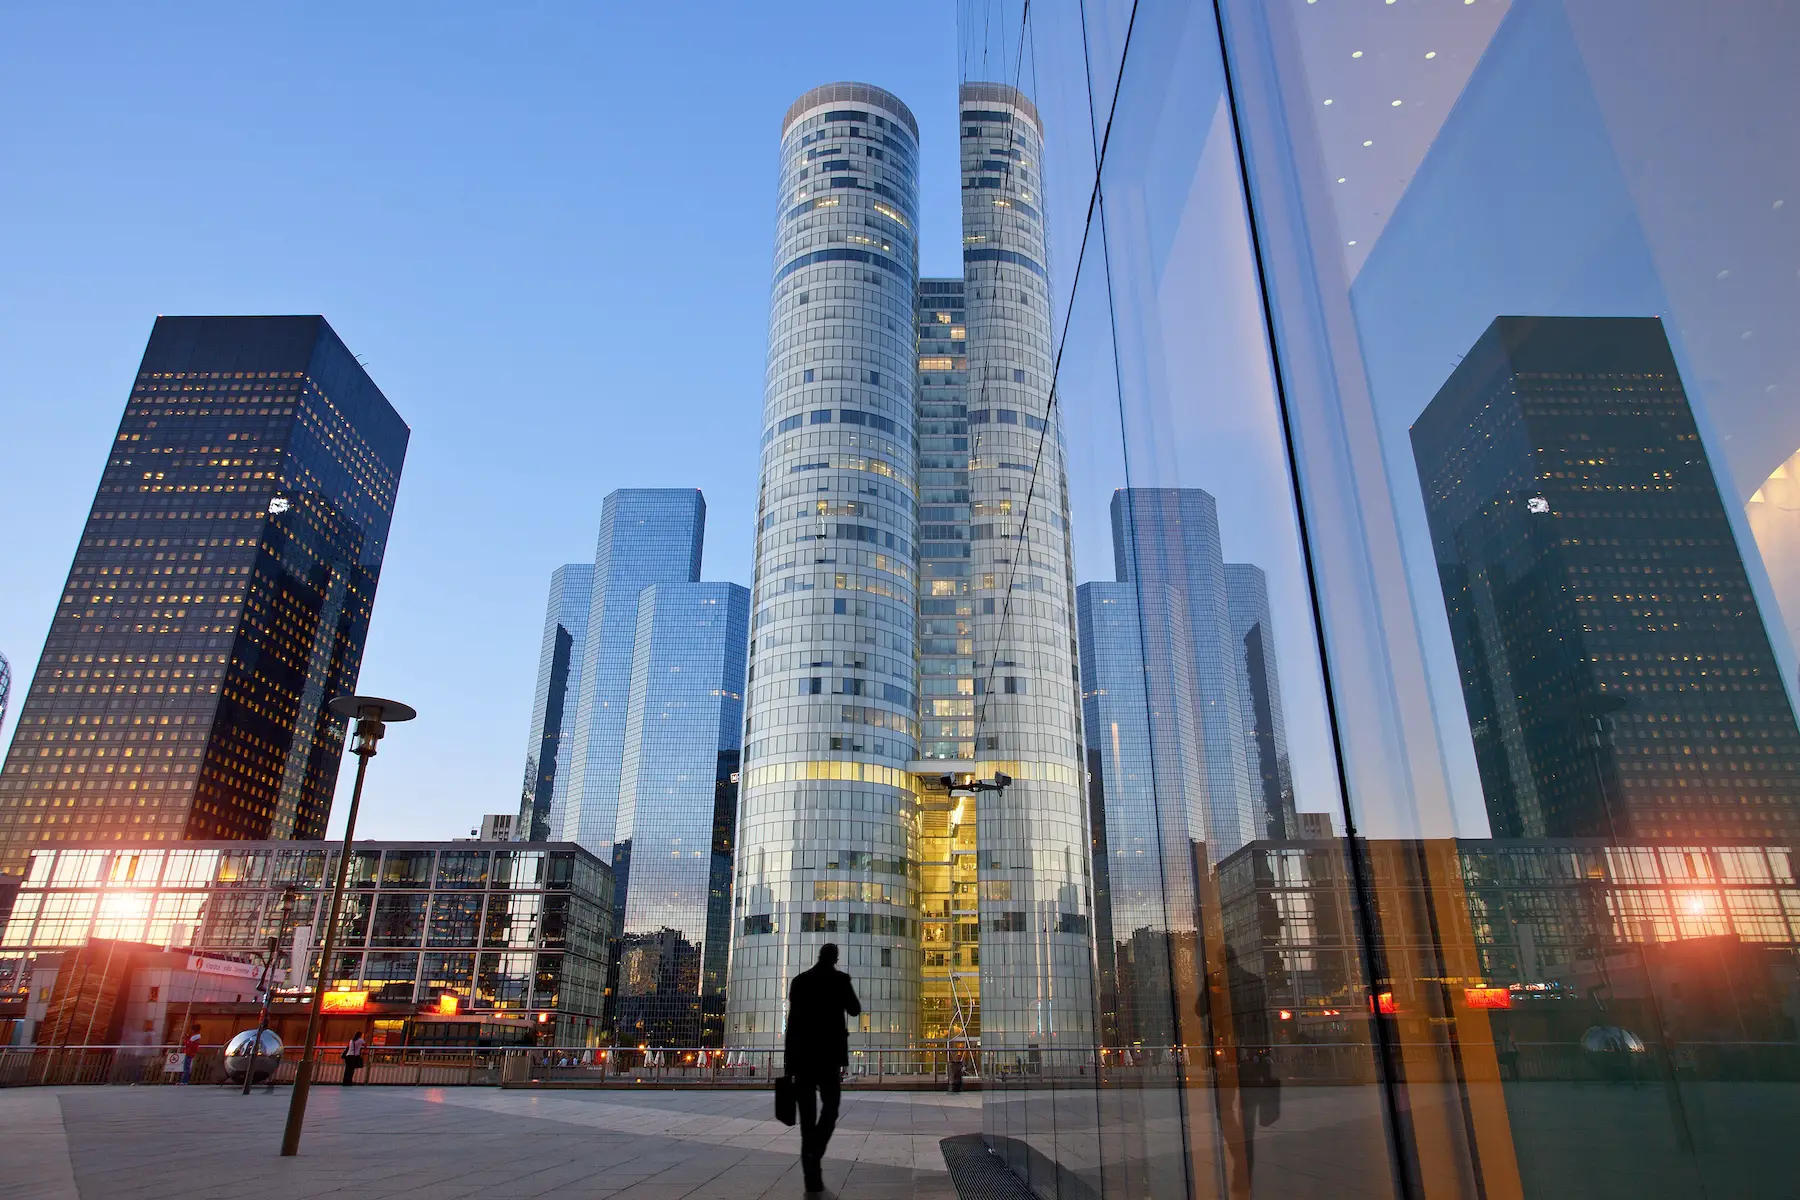 Paris business district, La Défense, is shown at sunrise, with the sun reflecting off the buildings